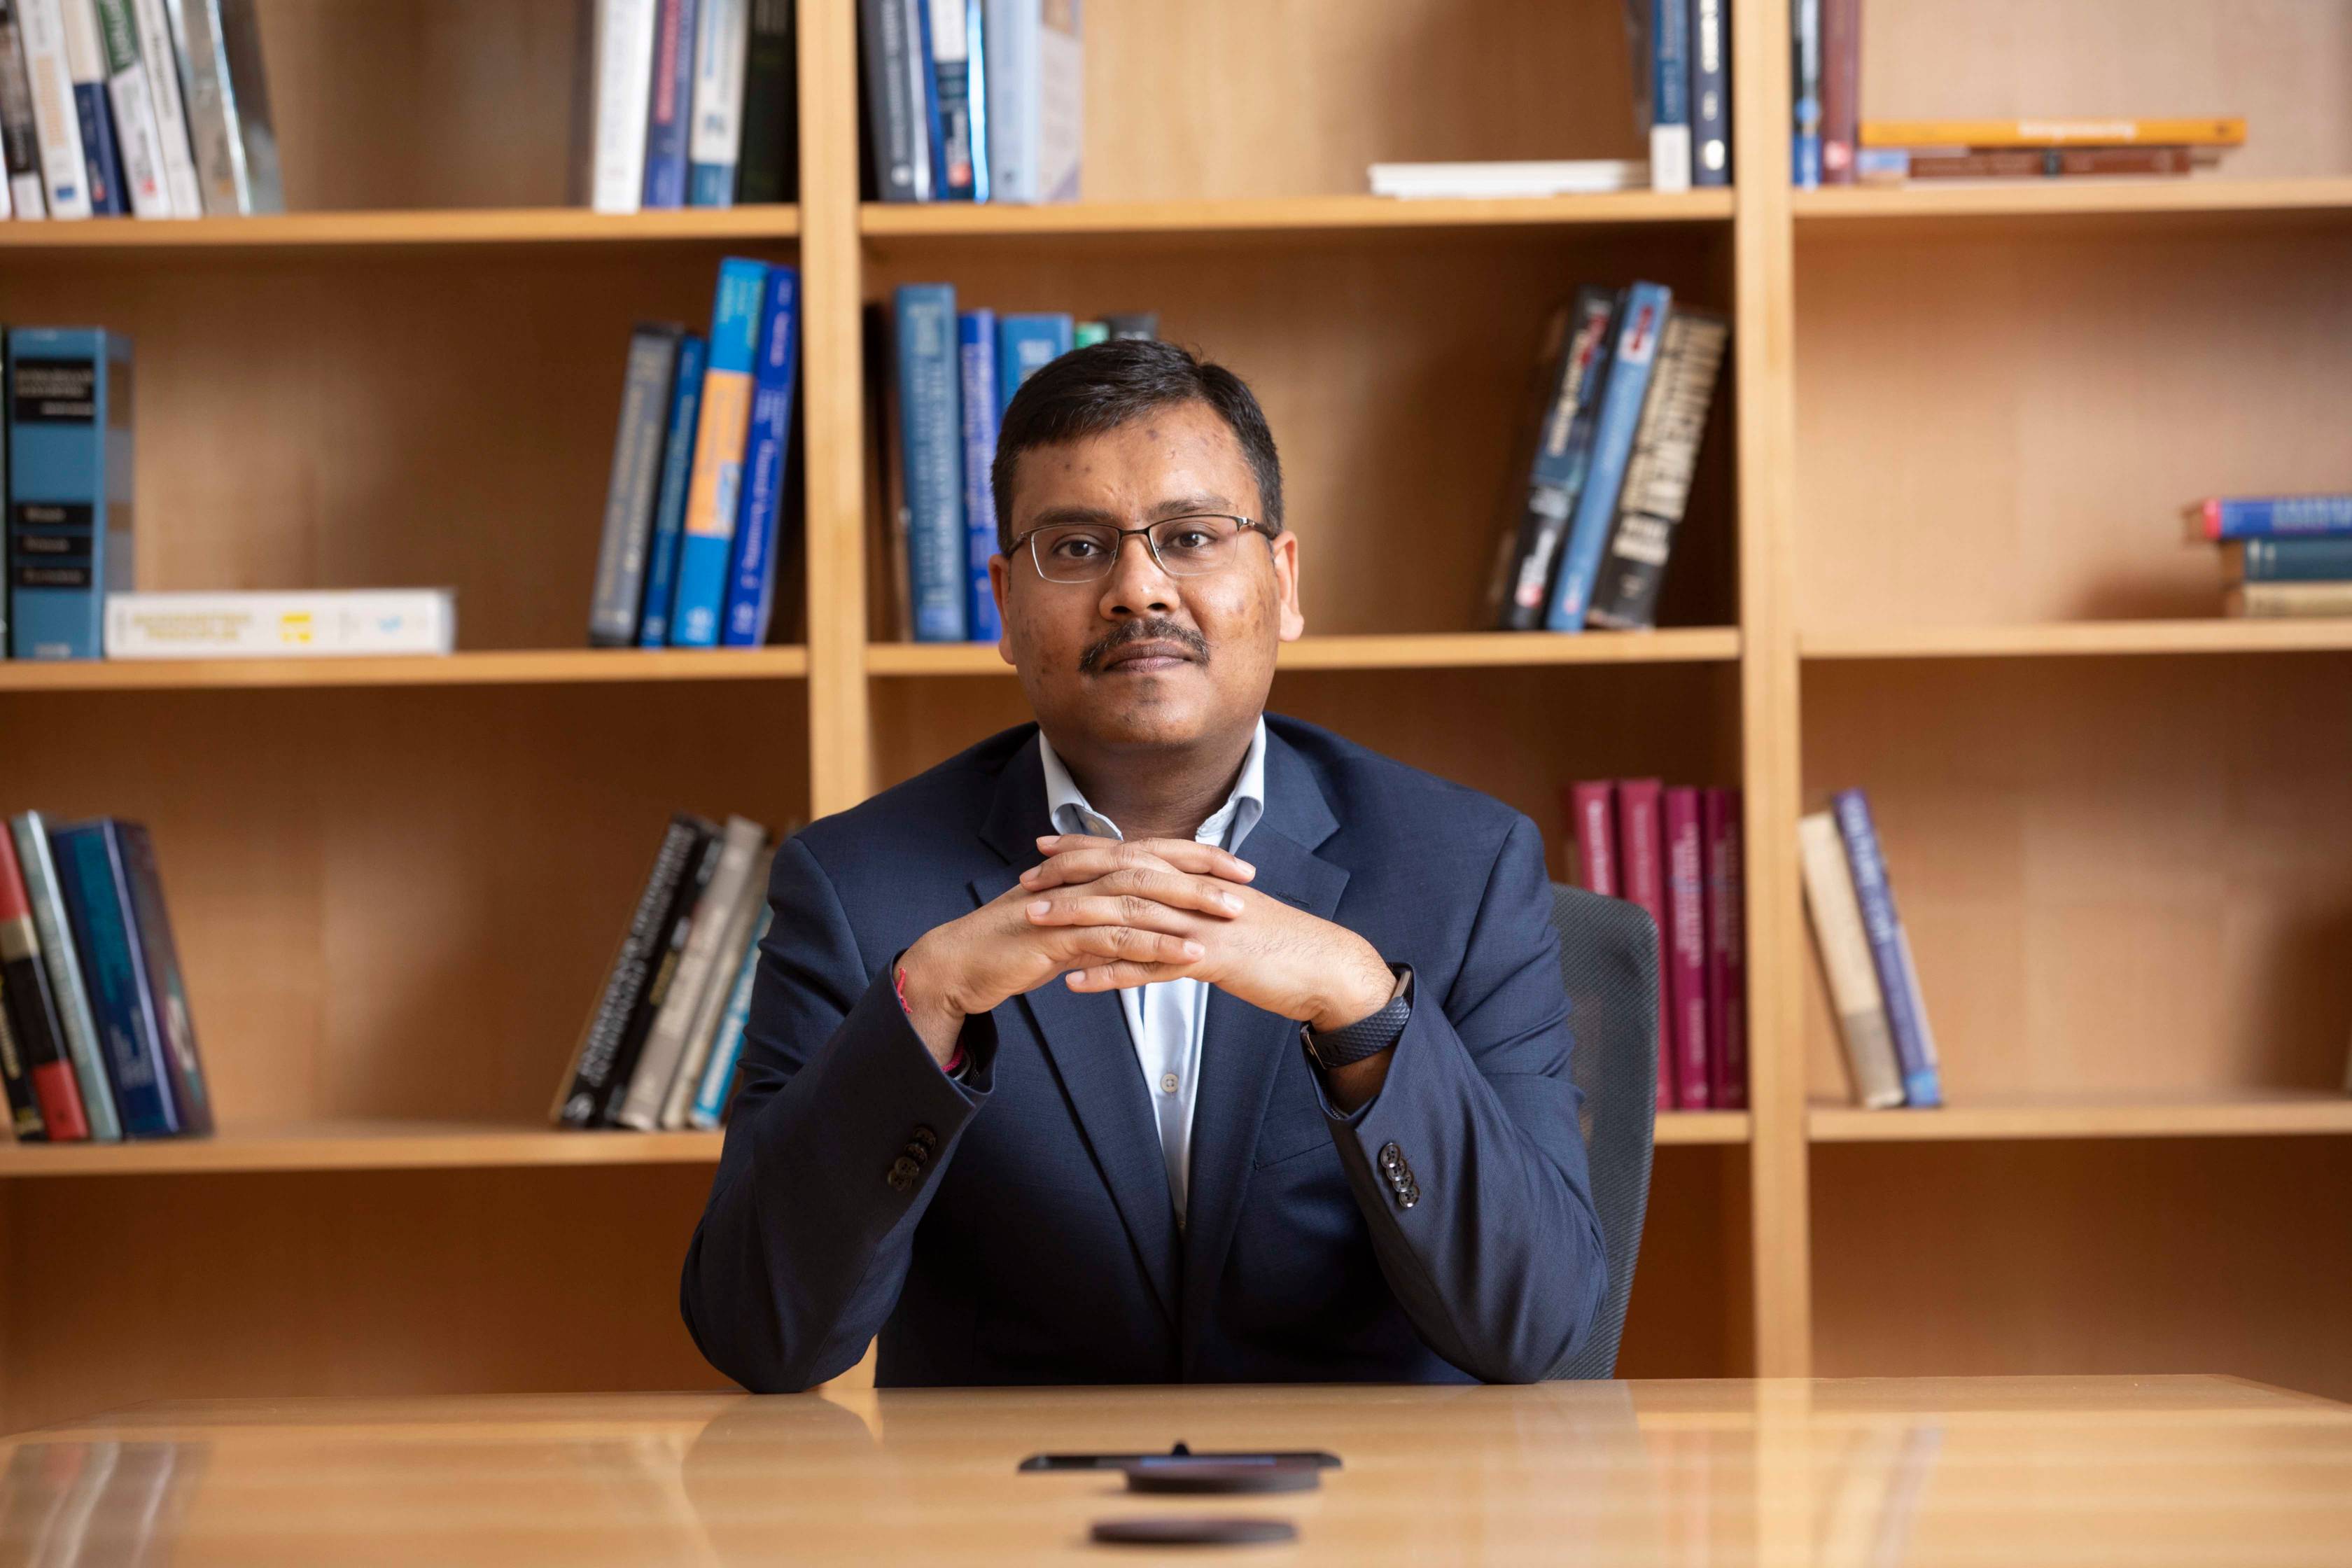 Dr. Gupta sitting in front of a bookcase